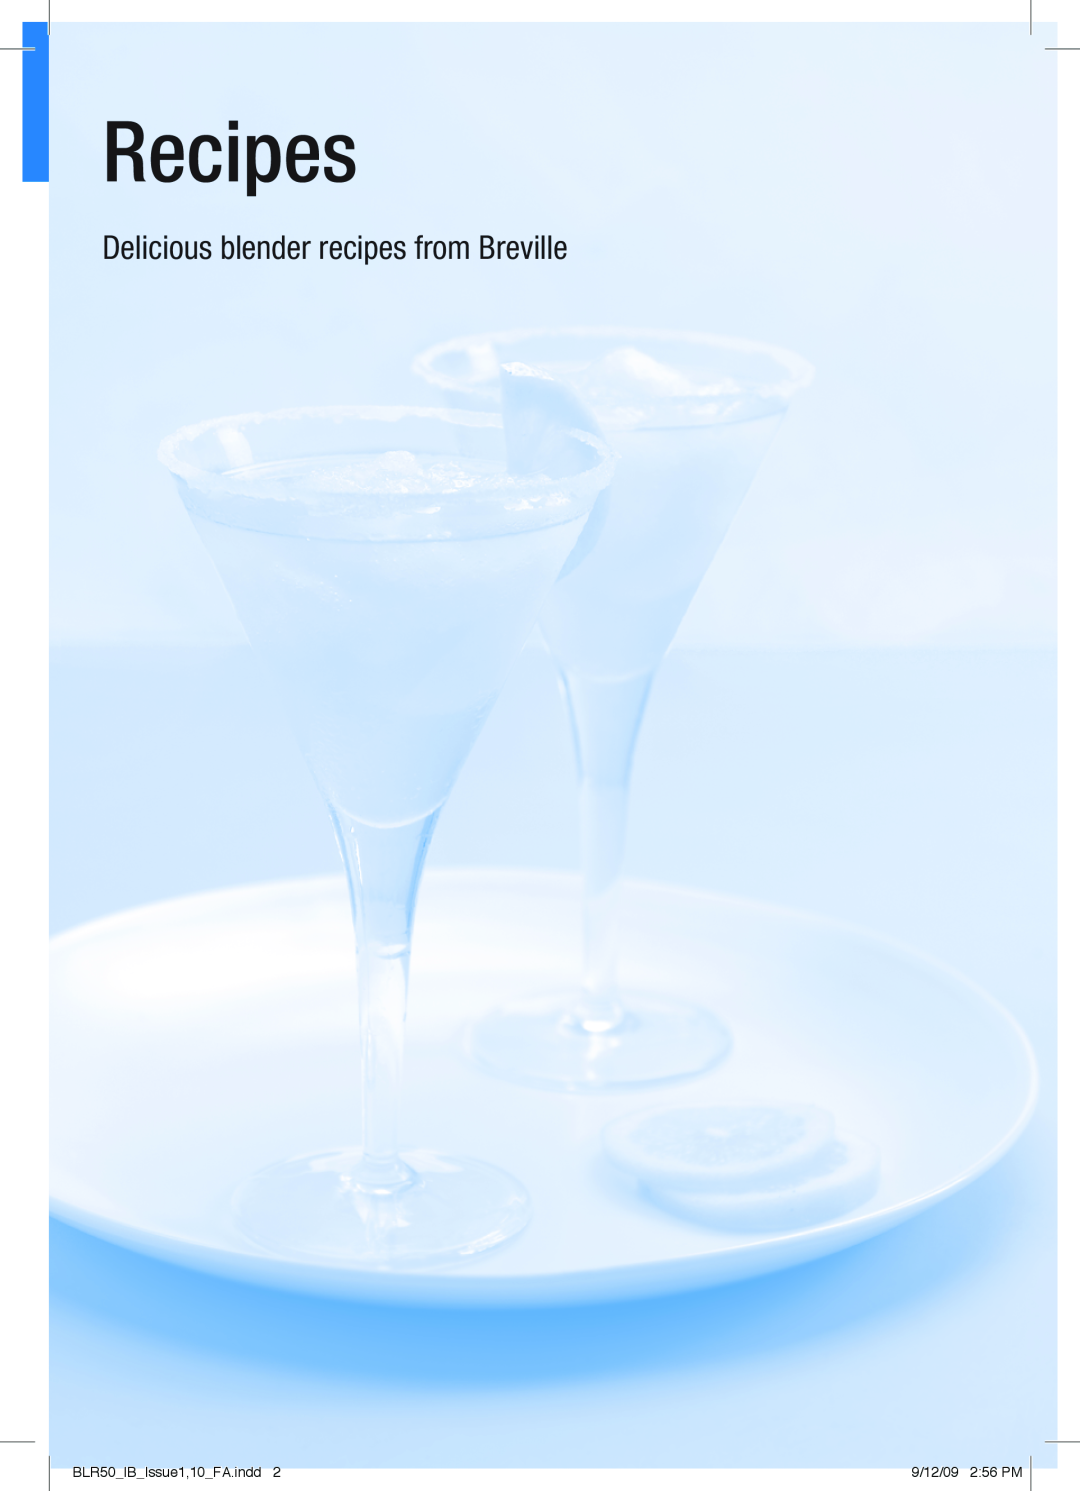 Breville manual Recipes, Delicious blender recipes from Breville, BLR50IBIssue1,10FA.indd, 9/12/09 256 PM 